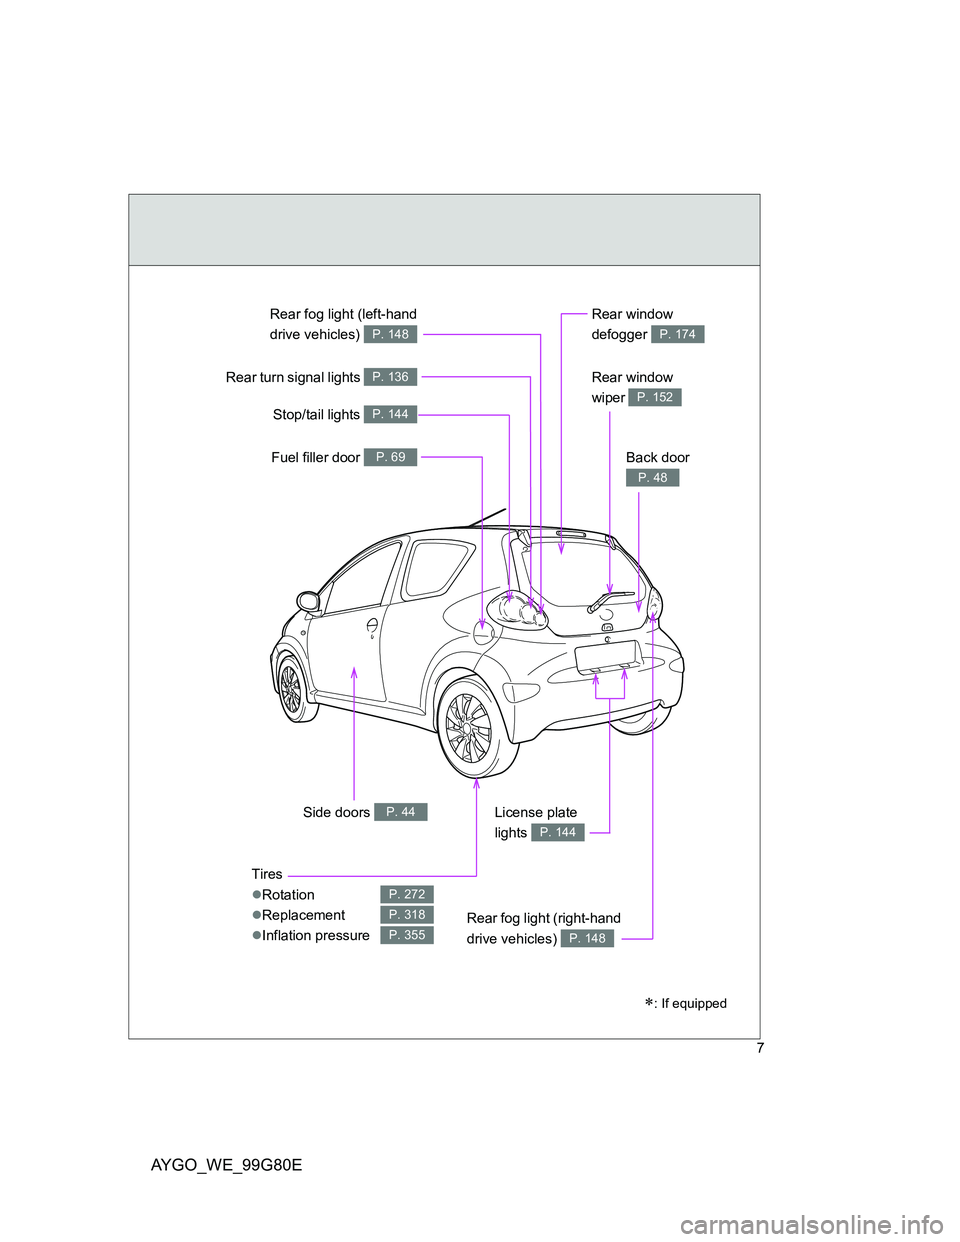 TOYOTA AYGO 2013  Owners Manual (in English) AYGO_WE_99G80E
7
Rear window 
wiper 
P. 152
Tires
Rotation
Replacement
Inflation pressure
P. 272
P. 318
P. 355
Side doors P. 44
Rear window 
defogger 
P. 174
Fuel filler door P. 69
Stop/tail 